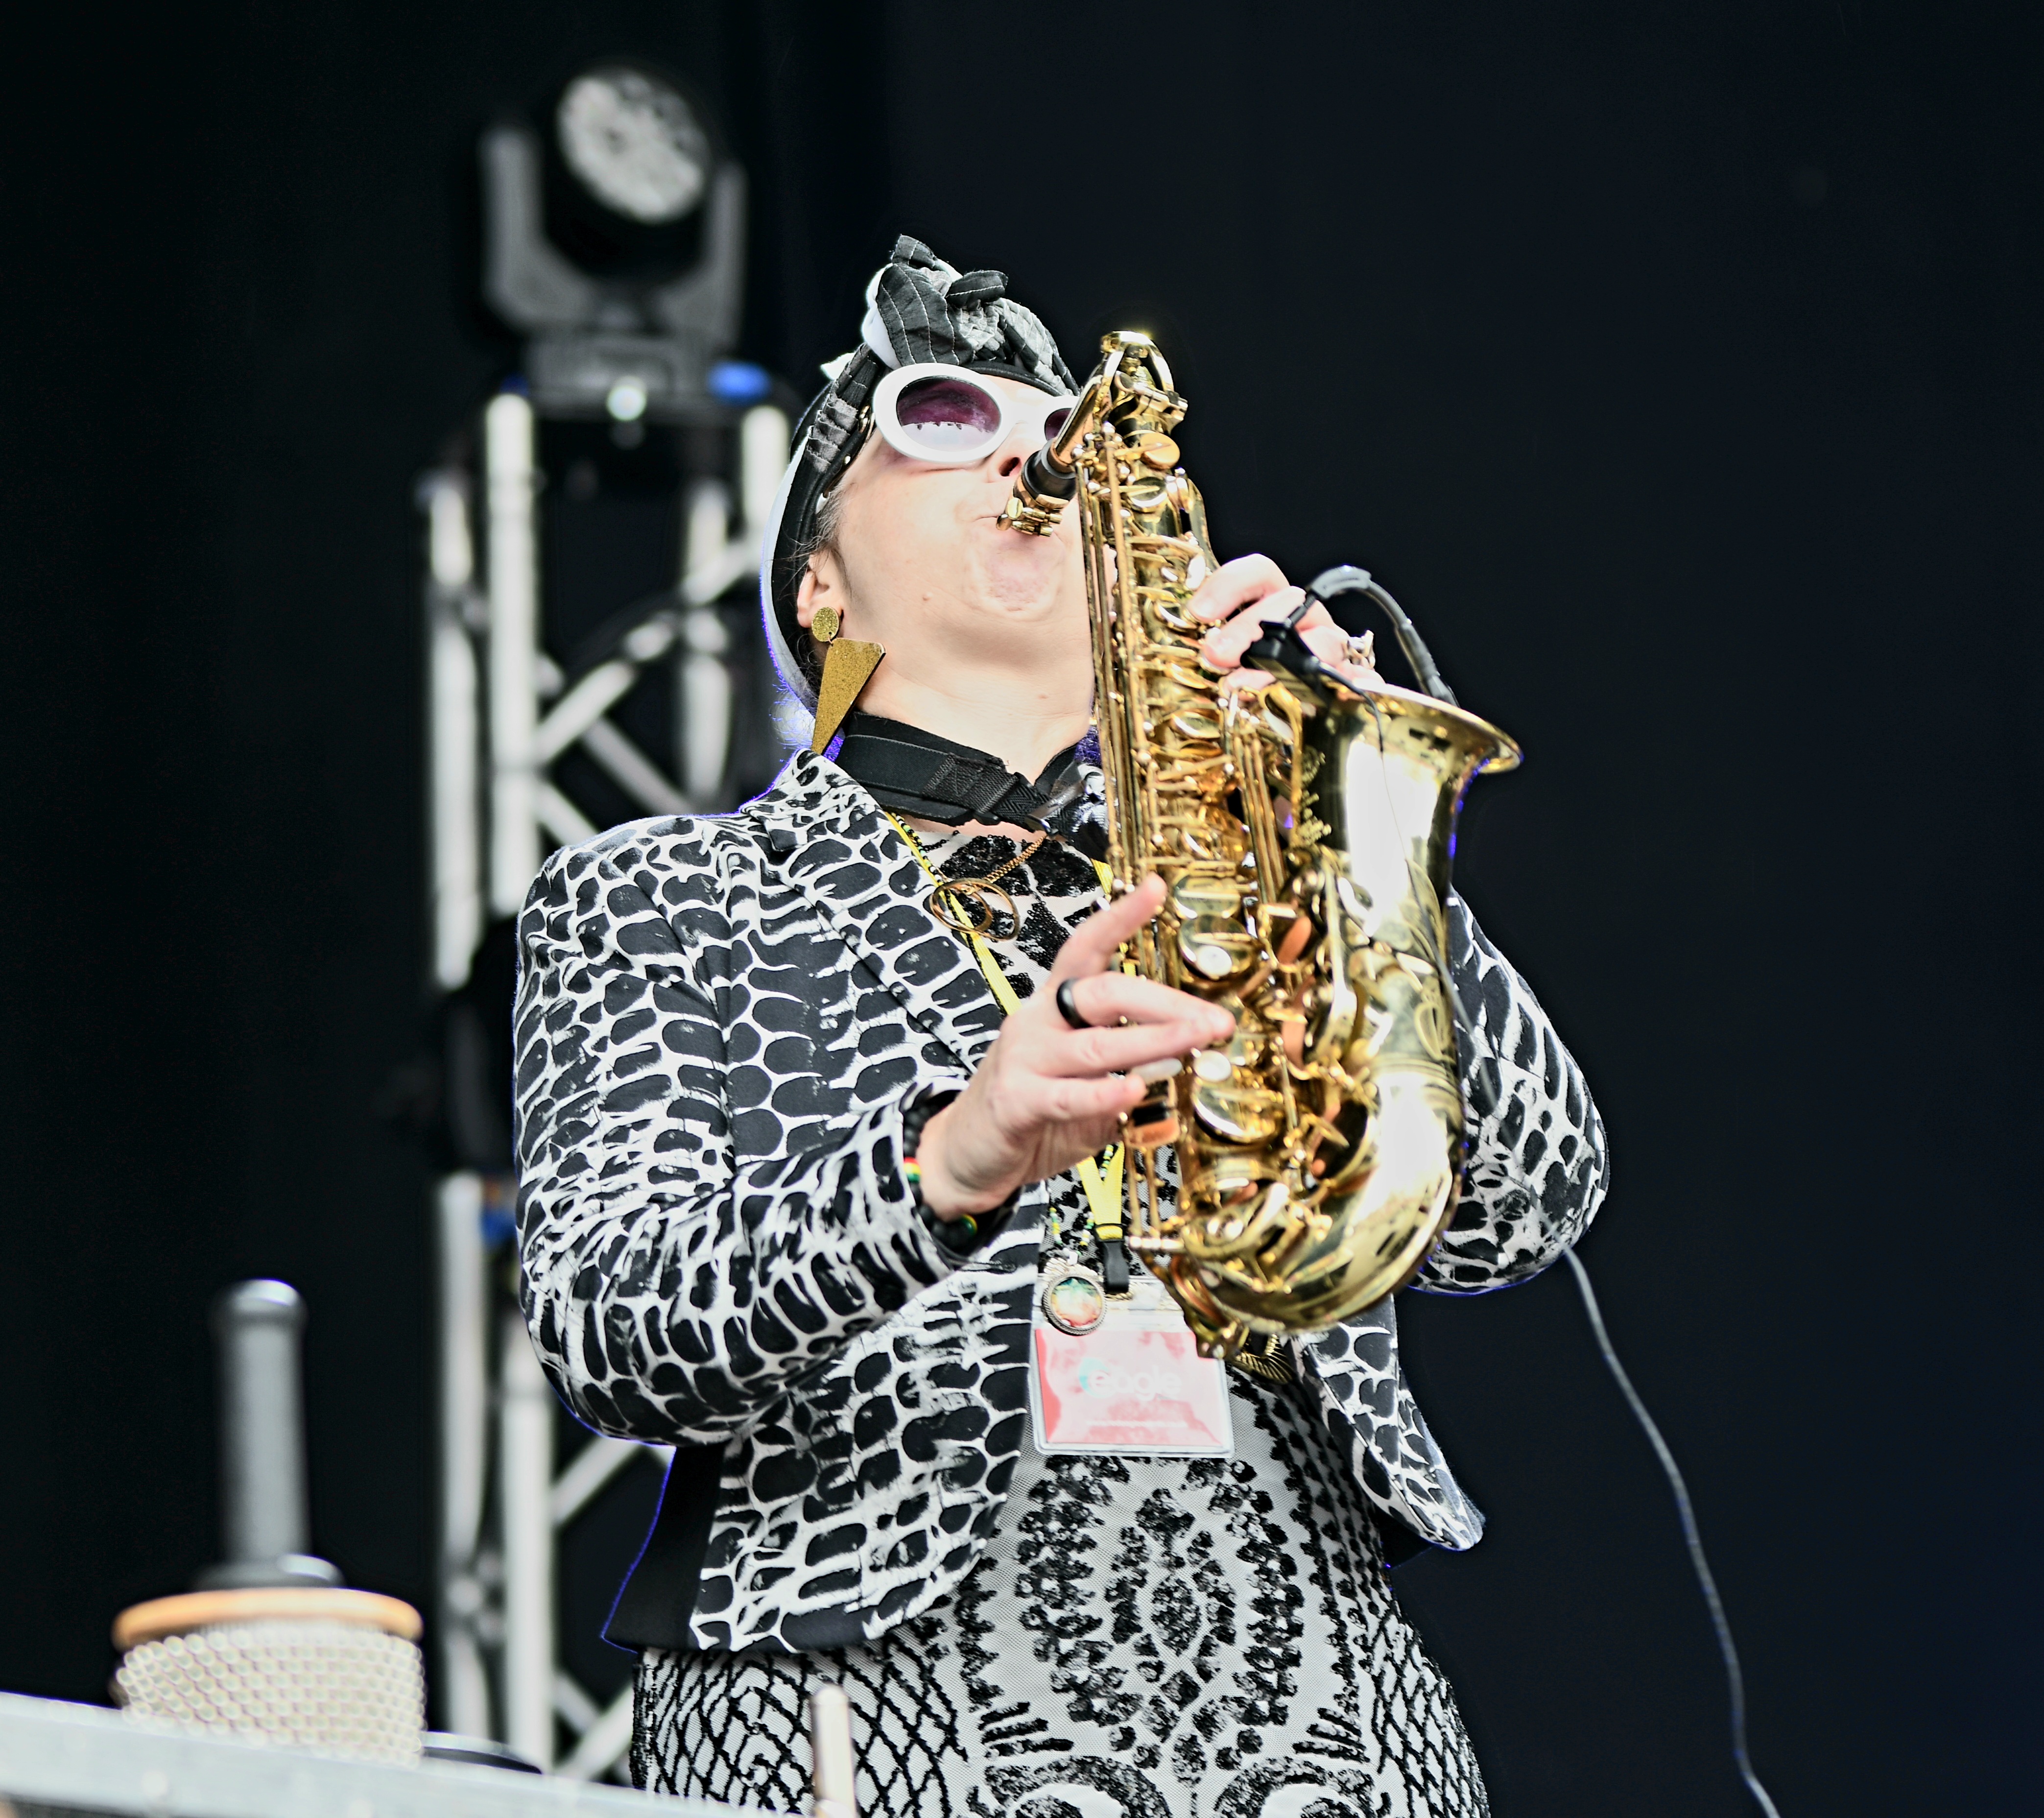 Photos by Robert Flake - Sarah Tobias on saxophone, flute, percussion and backing vocals with The Pioneers at Leeds Ska and Mod Festival, 2023